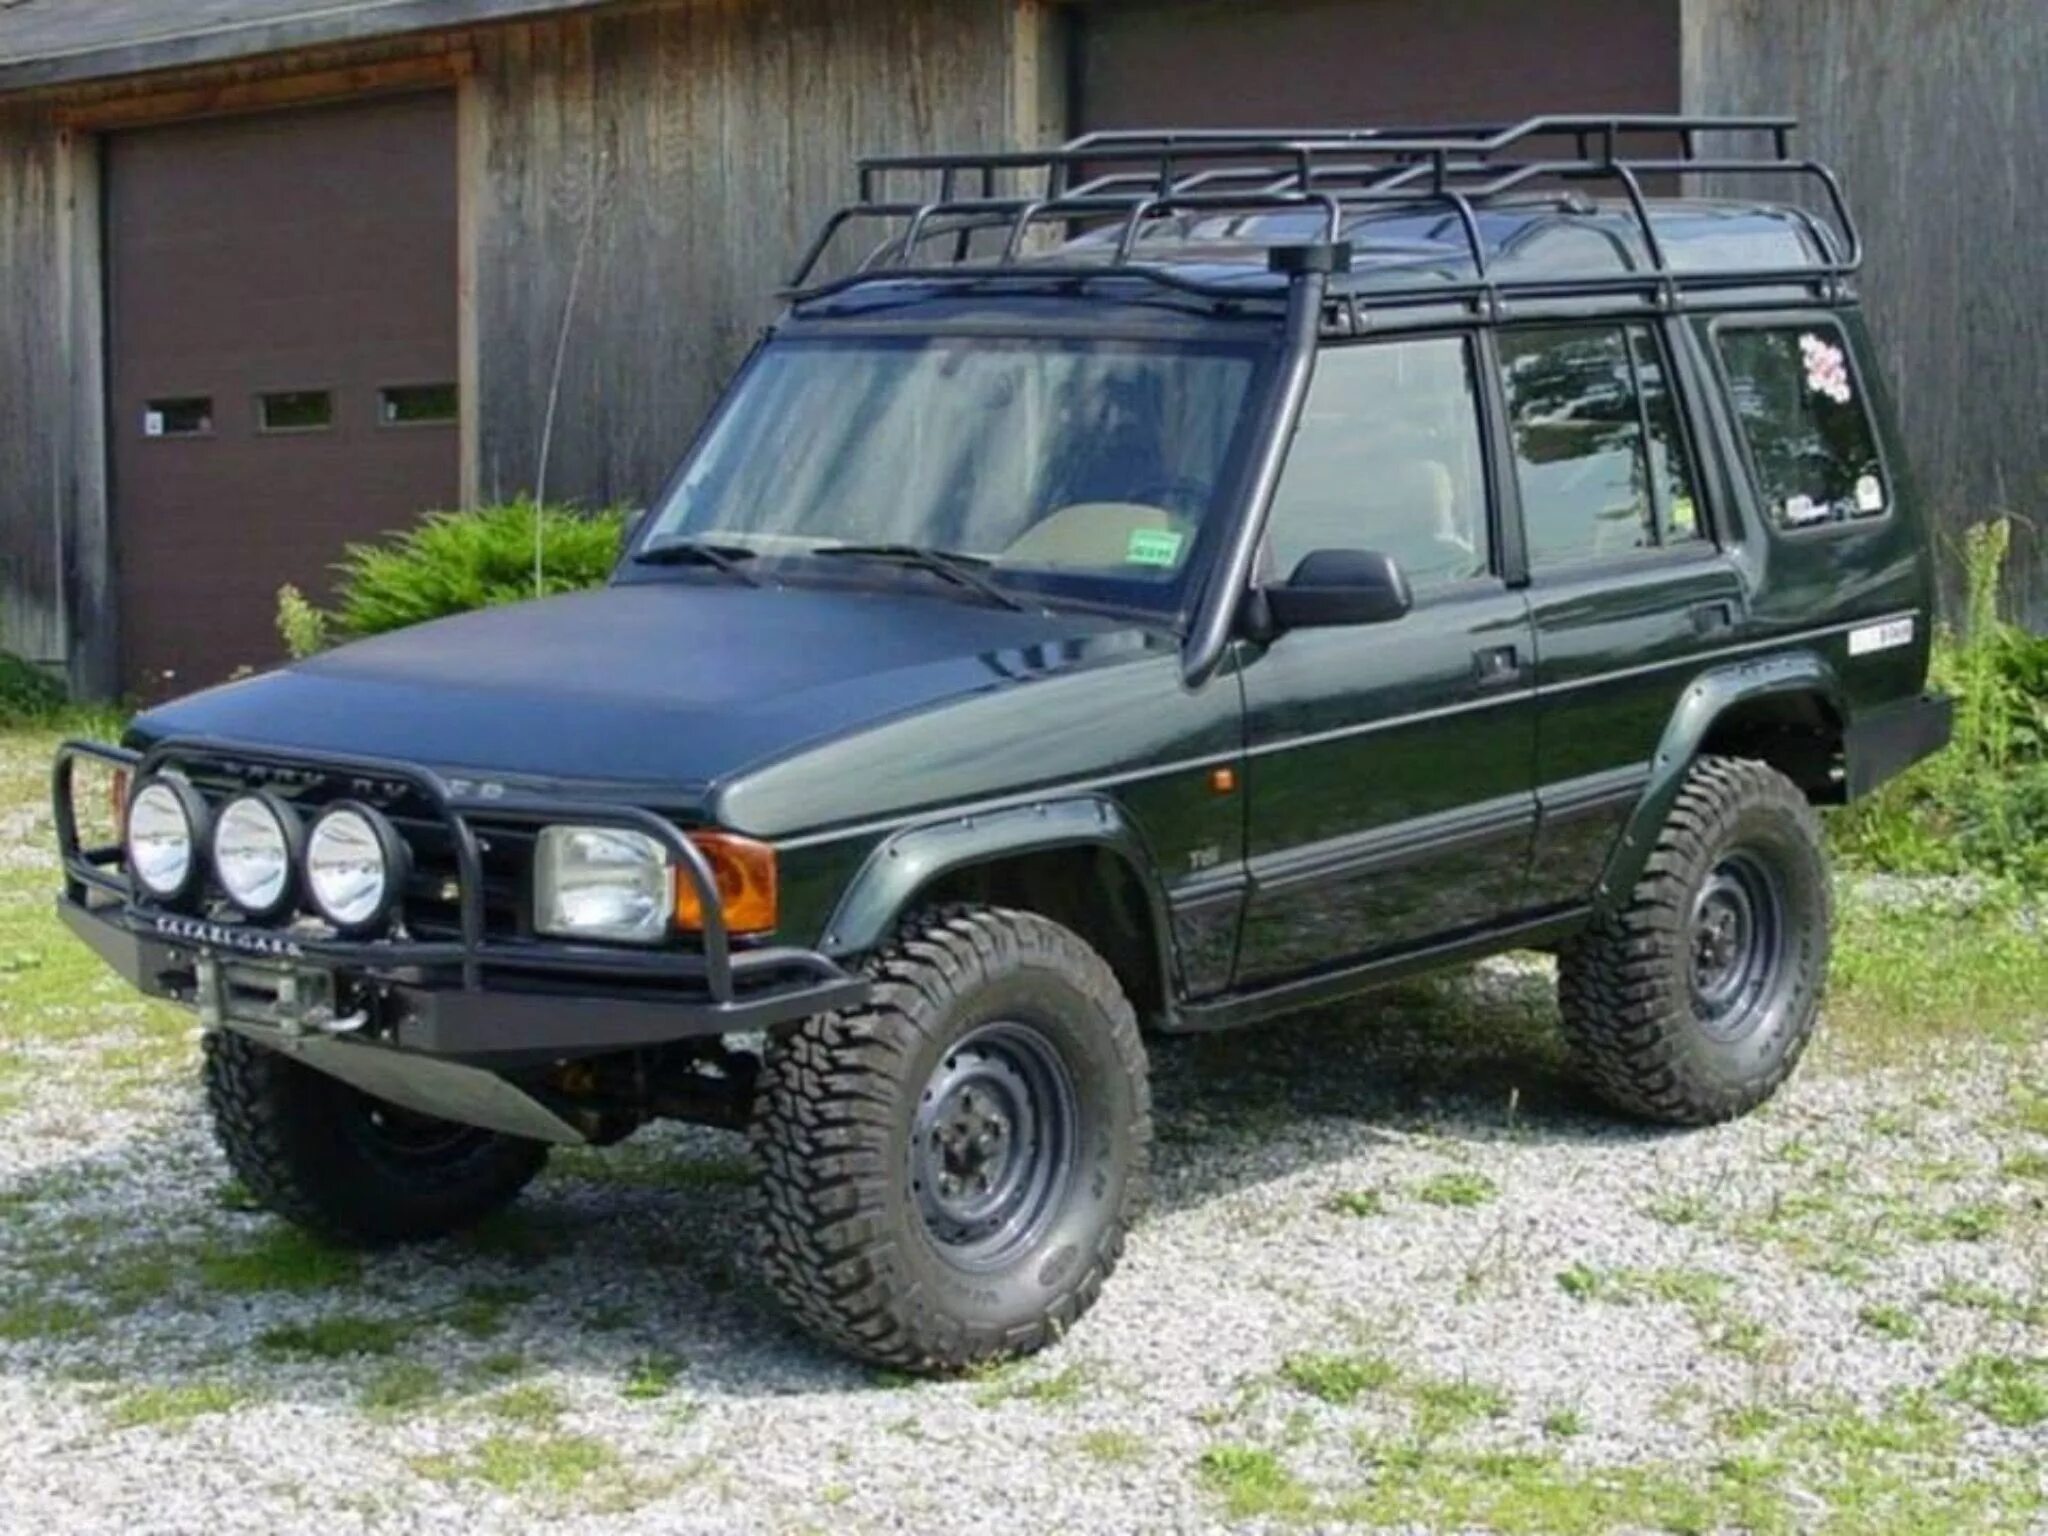 First discovery. Land Rover Discovery 1. Ленд Ровер Дискавери 2. Range Rover Discovery 1. Land Rover Discovery 1 off Road.